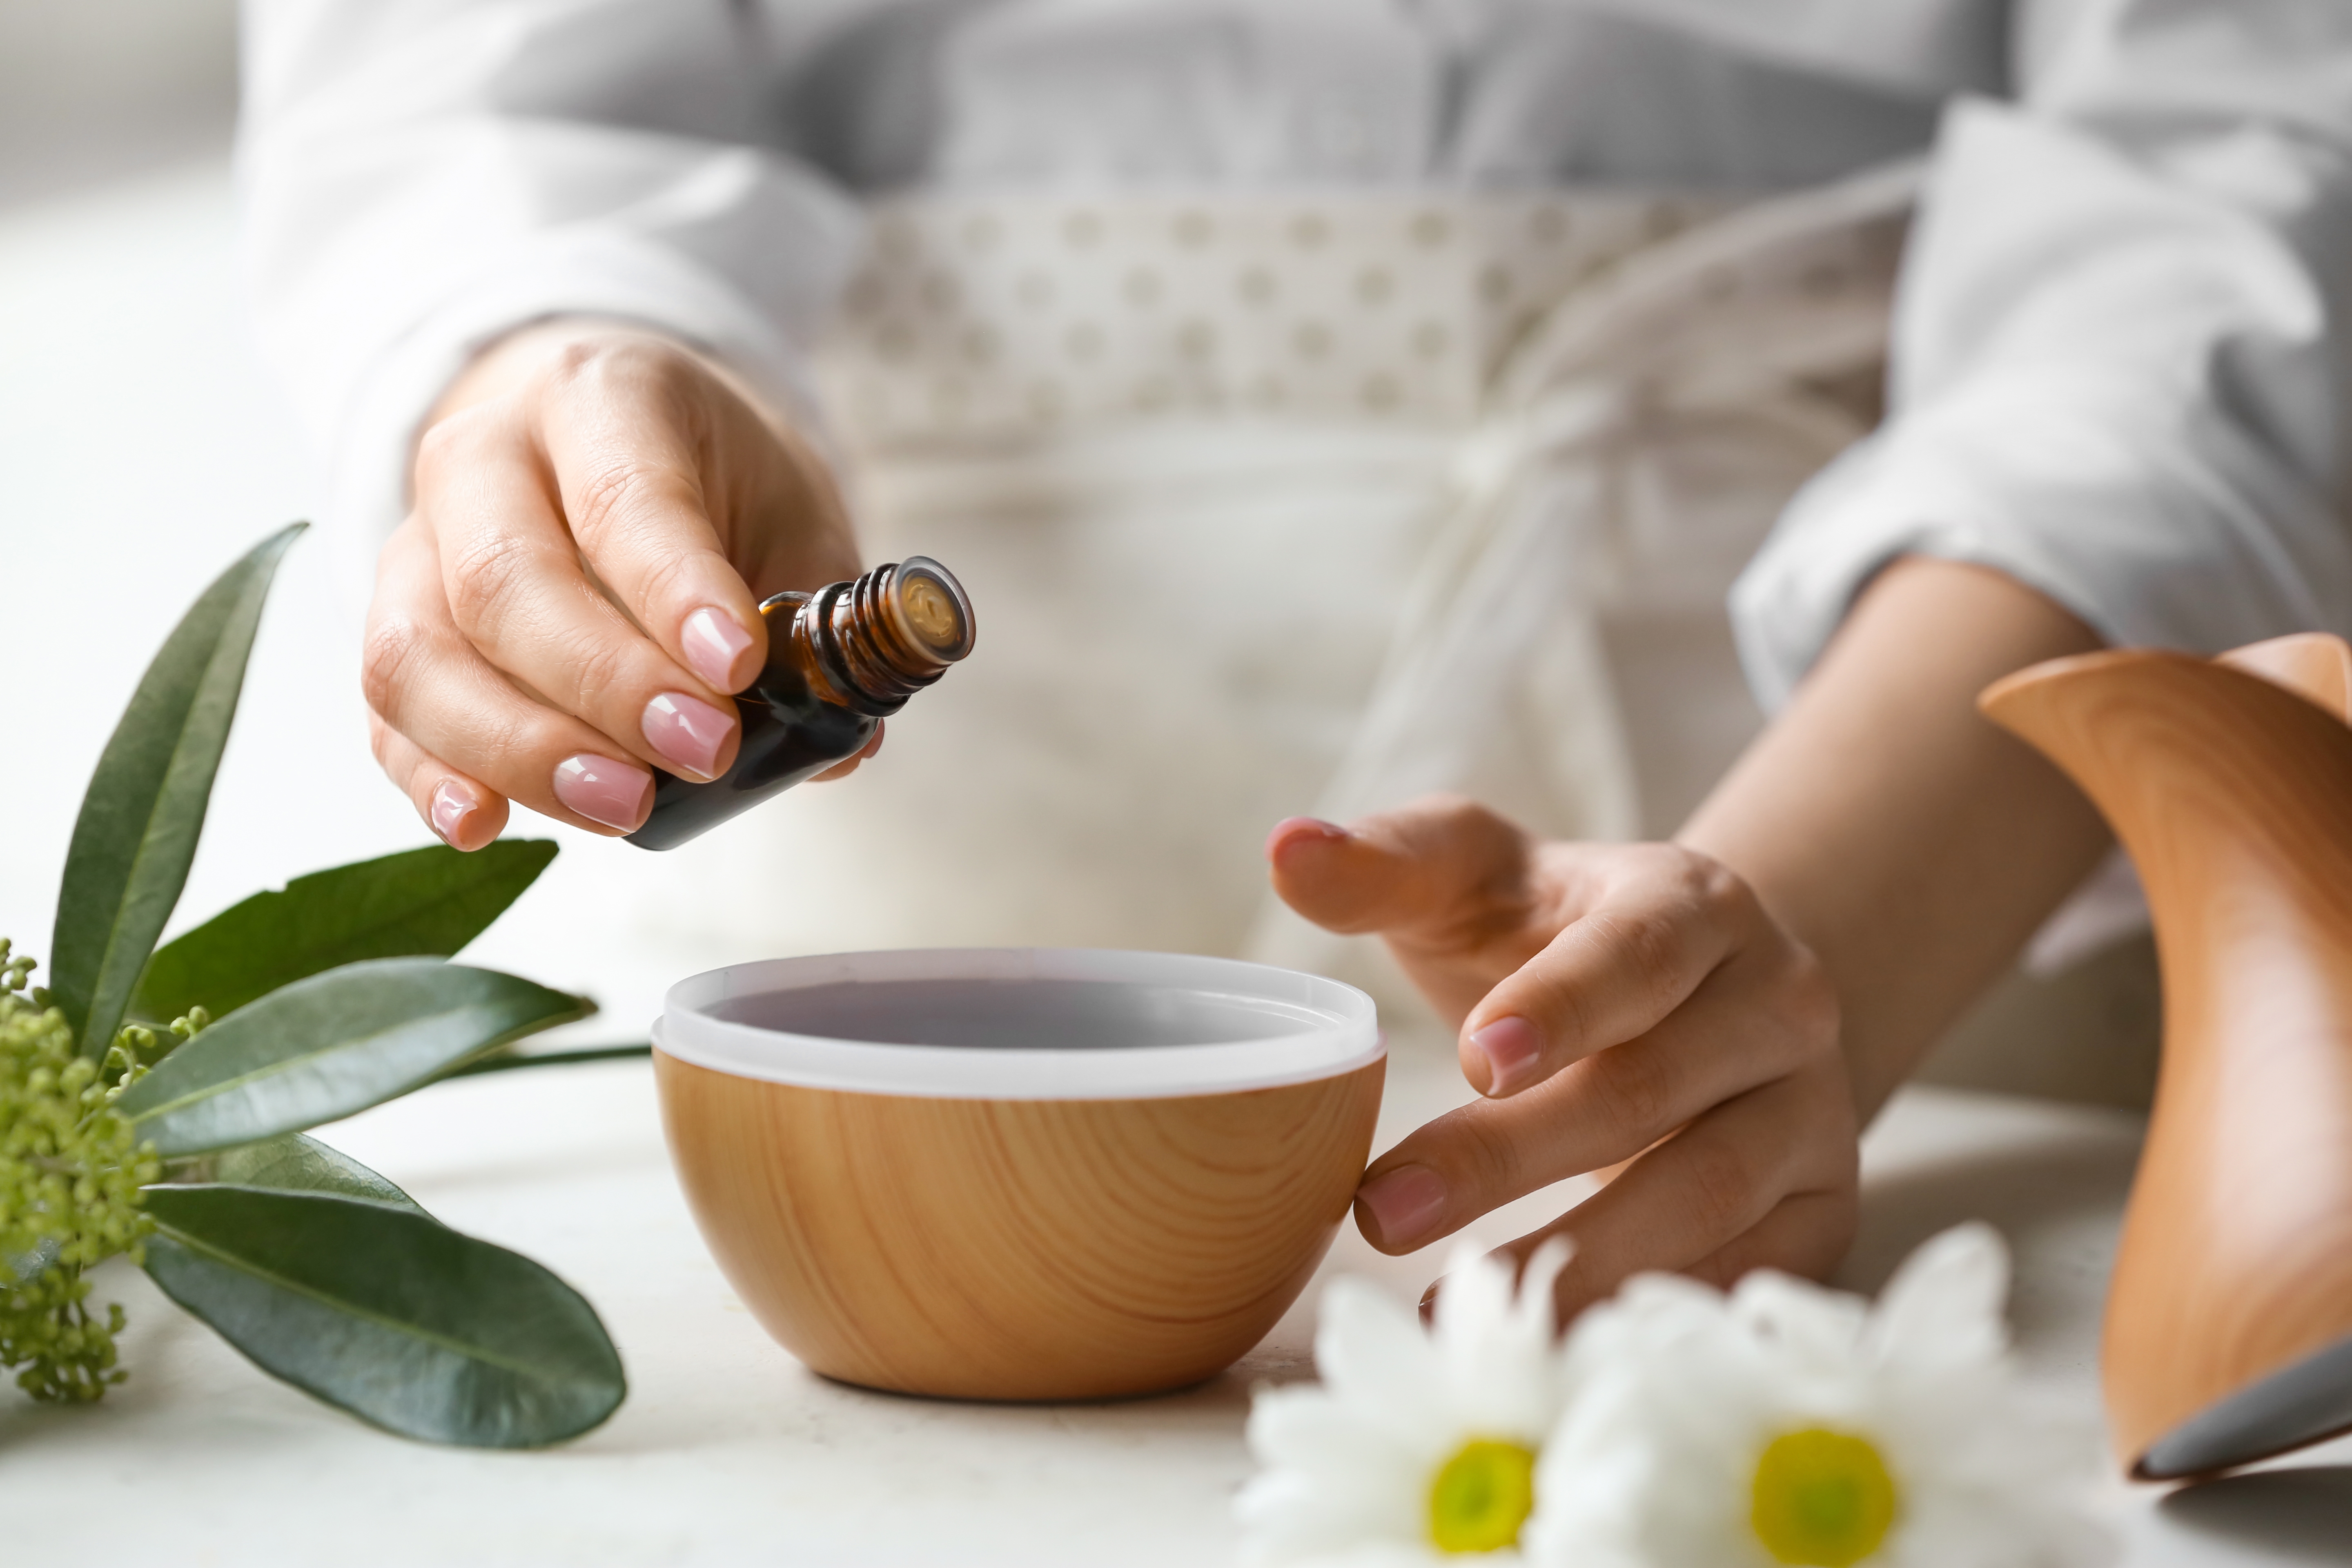 Person filling a diffuser with essential oils